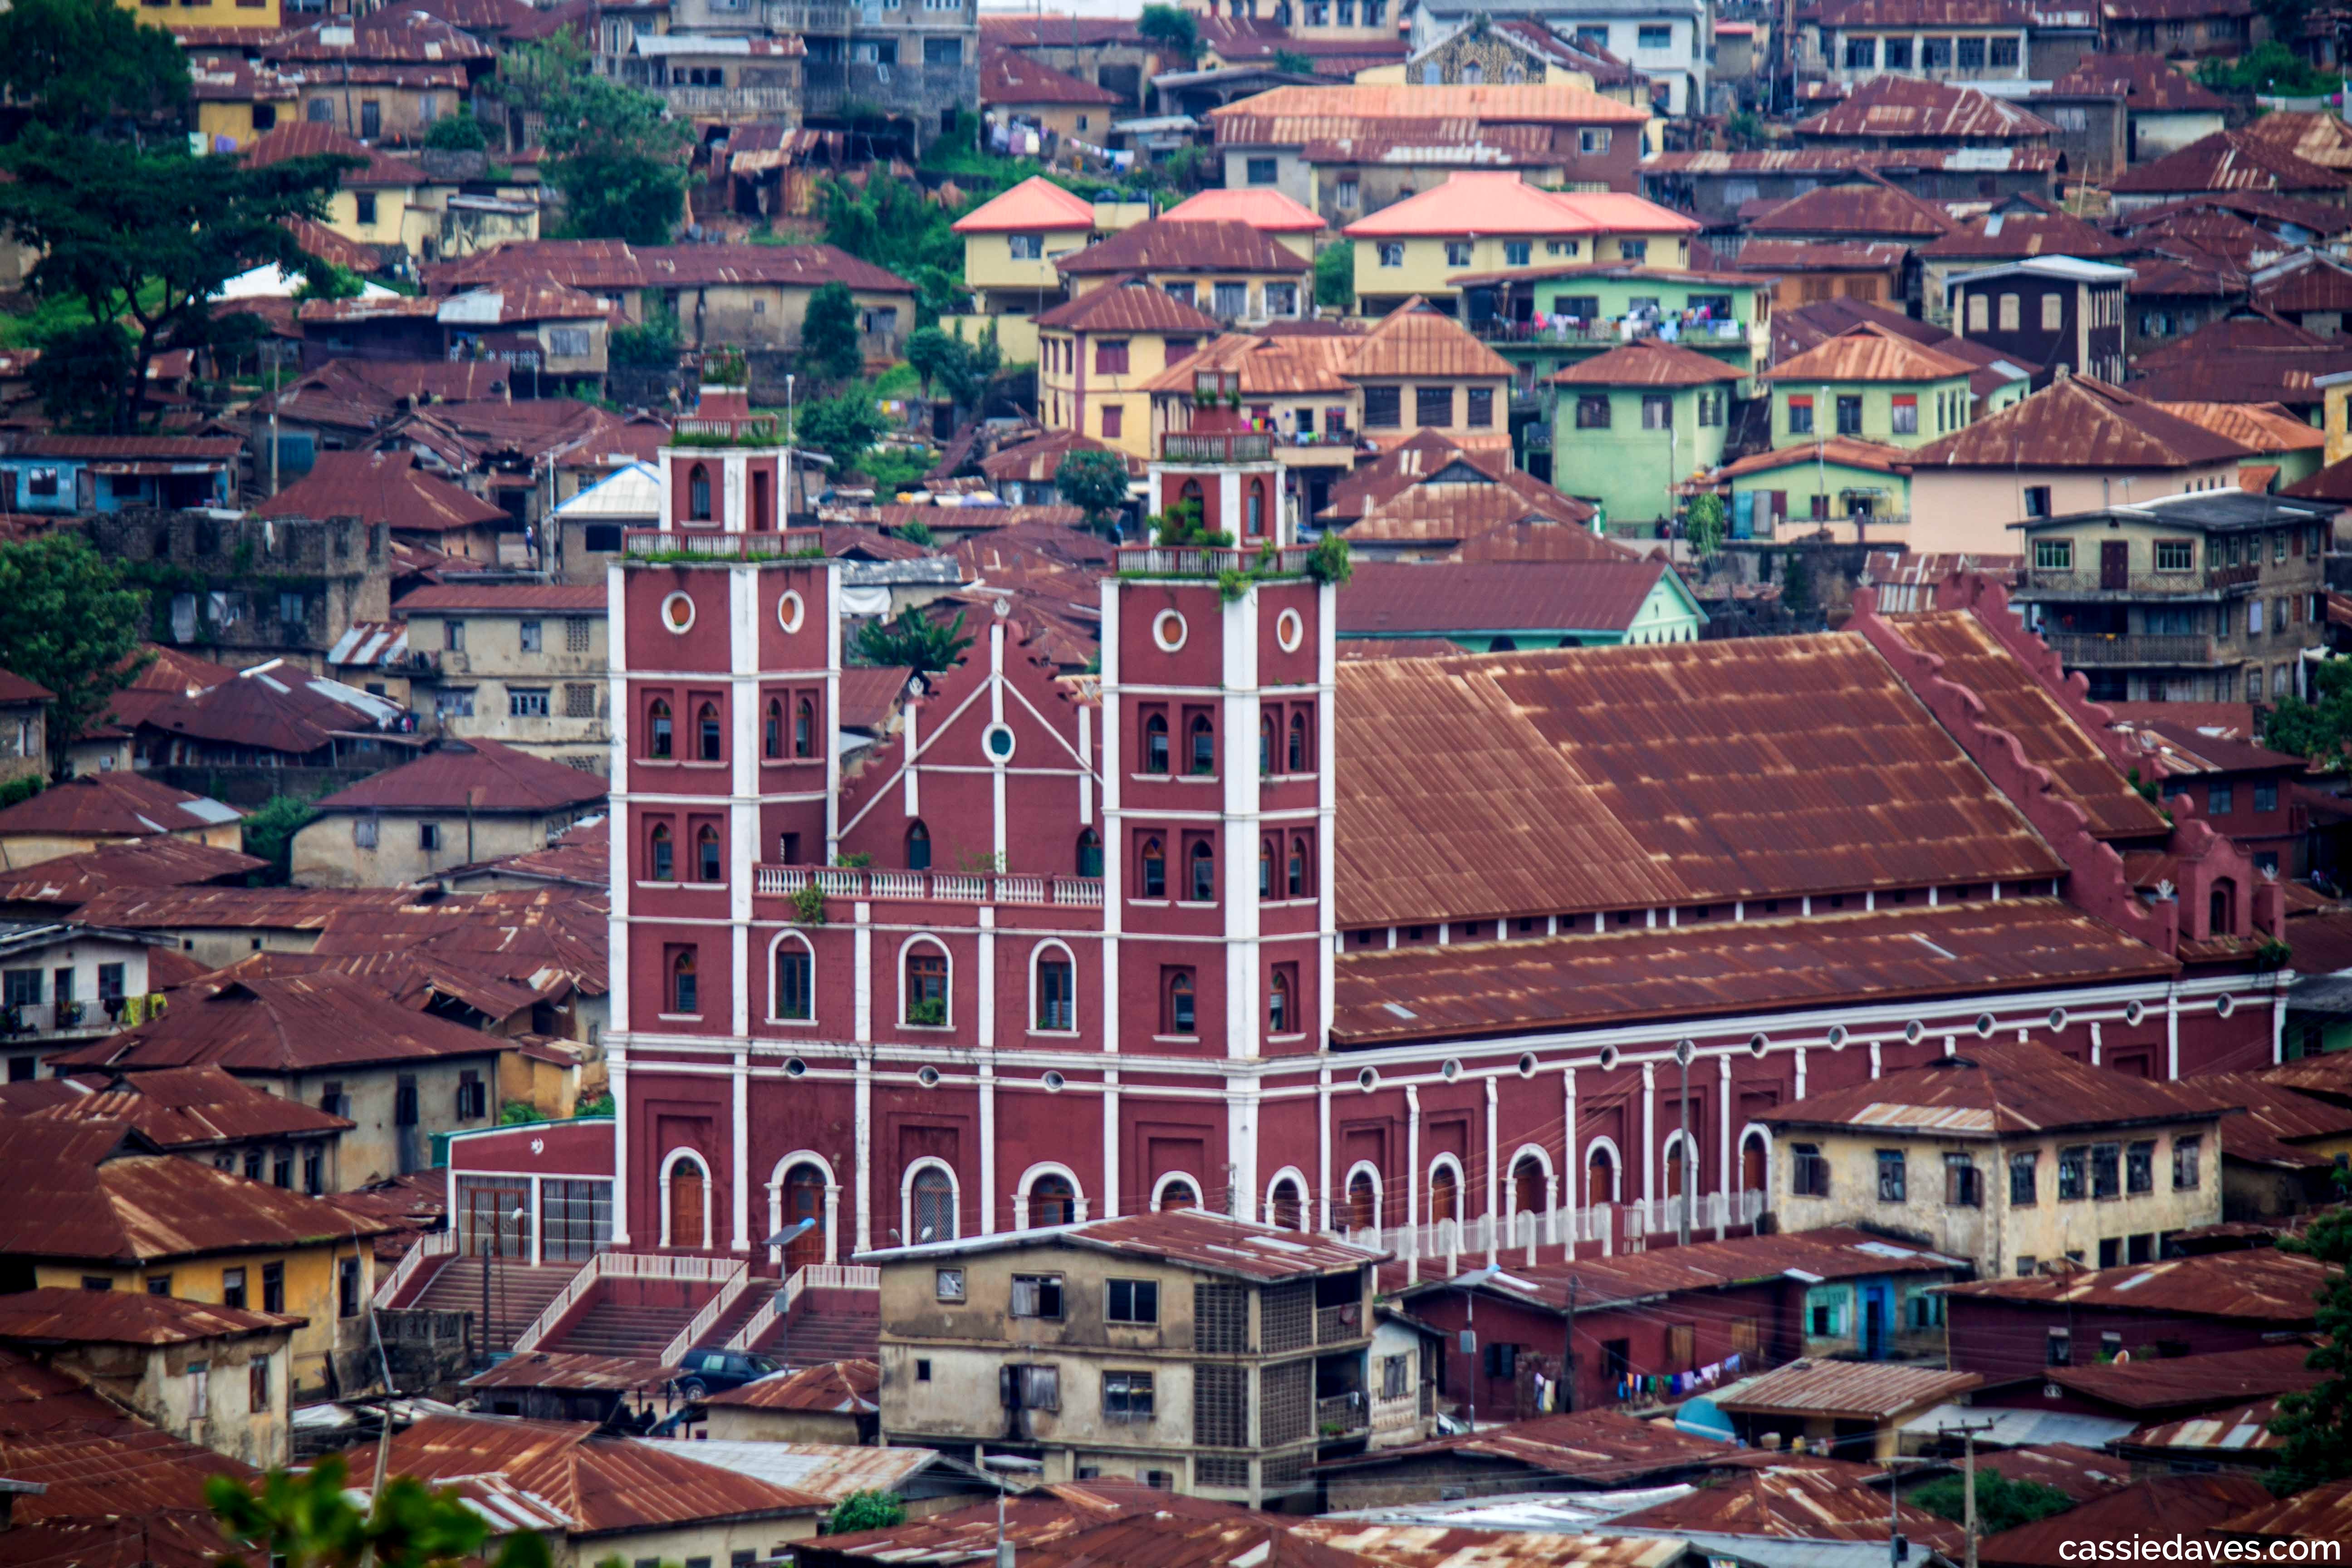 The central mosque in abeokuta